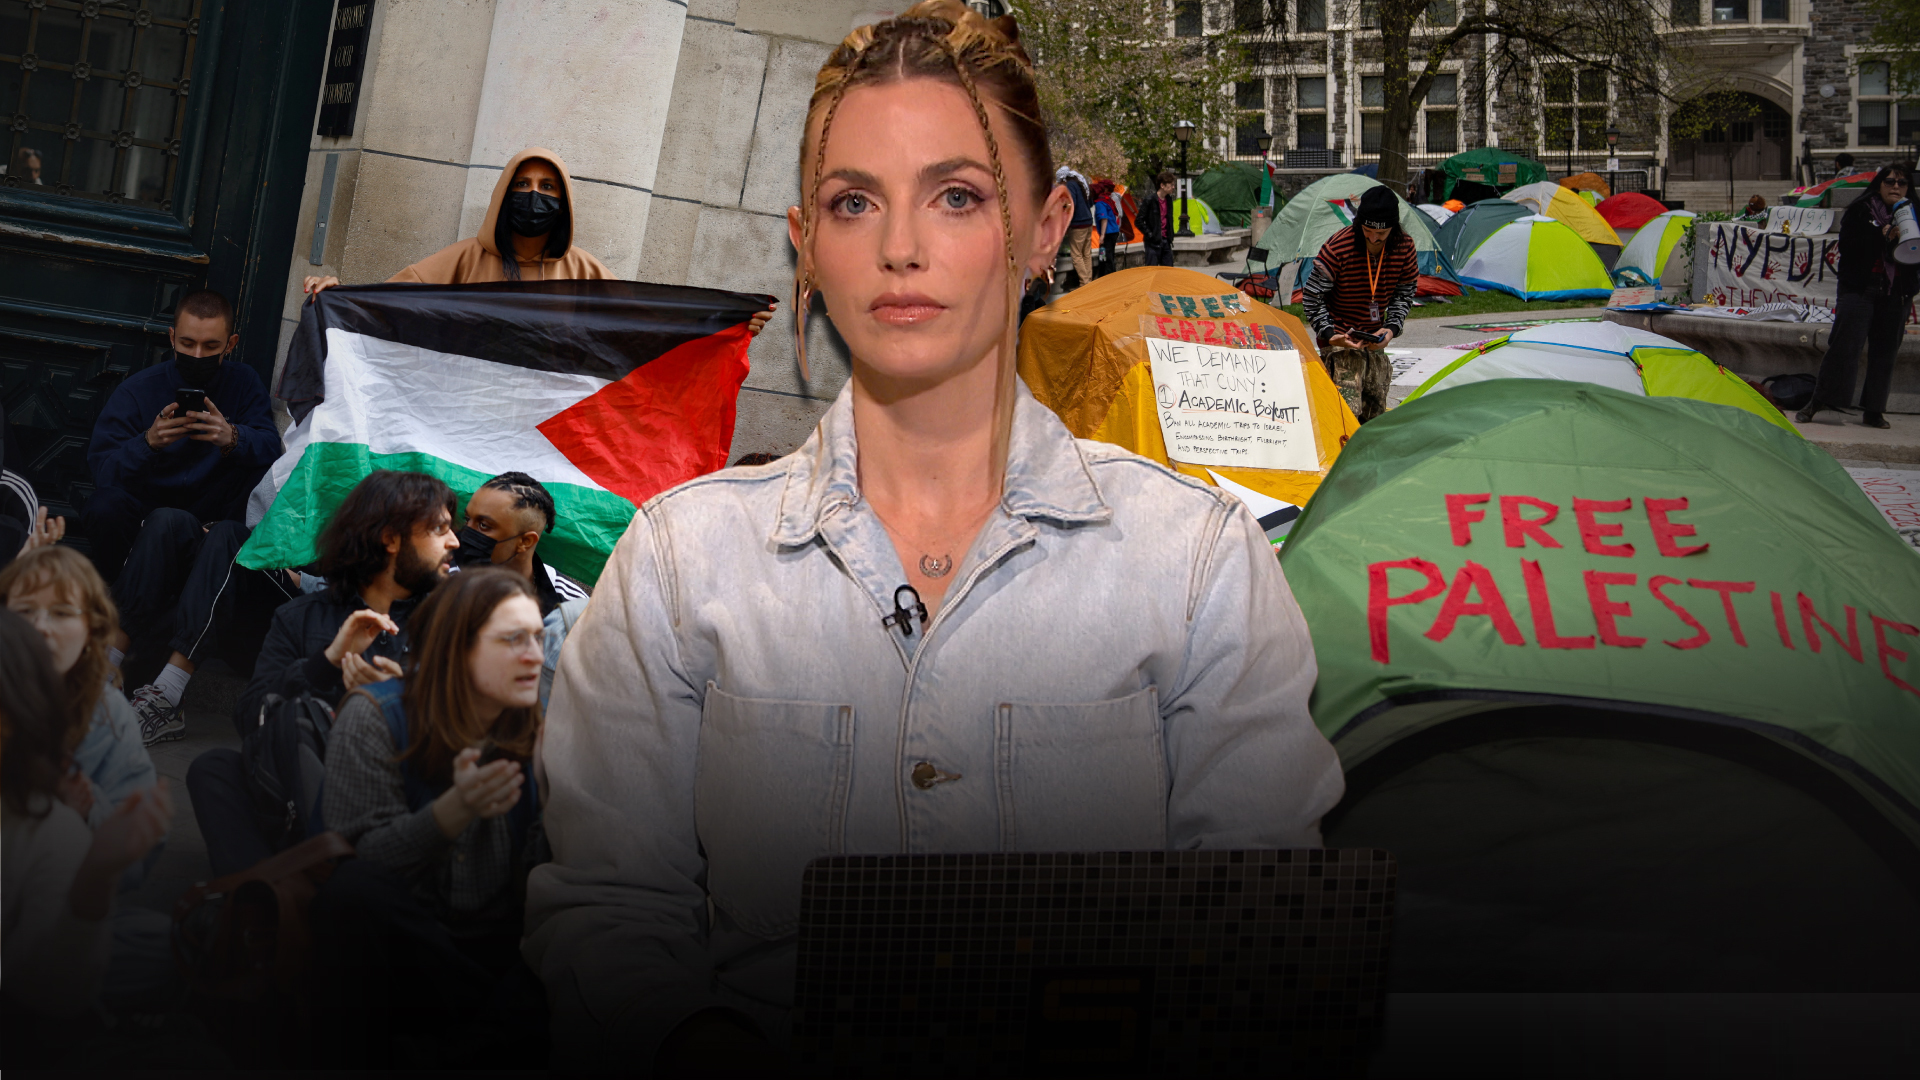 Student Activism: Solidarity for Gaza Seen Globally